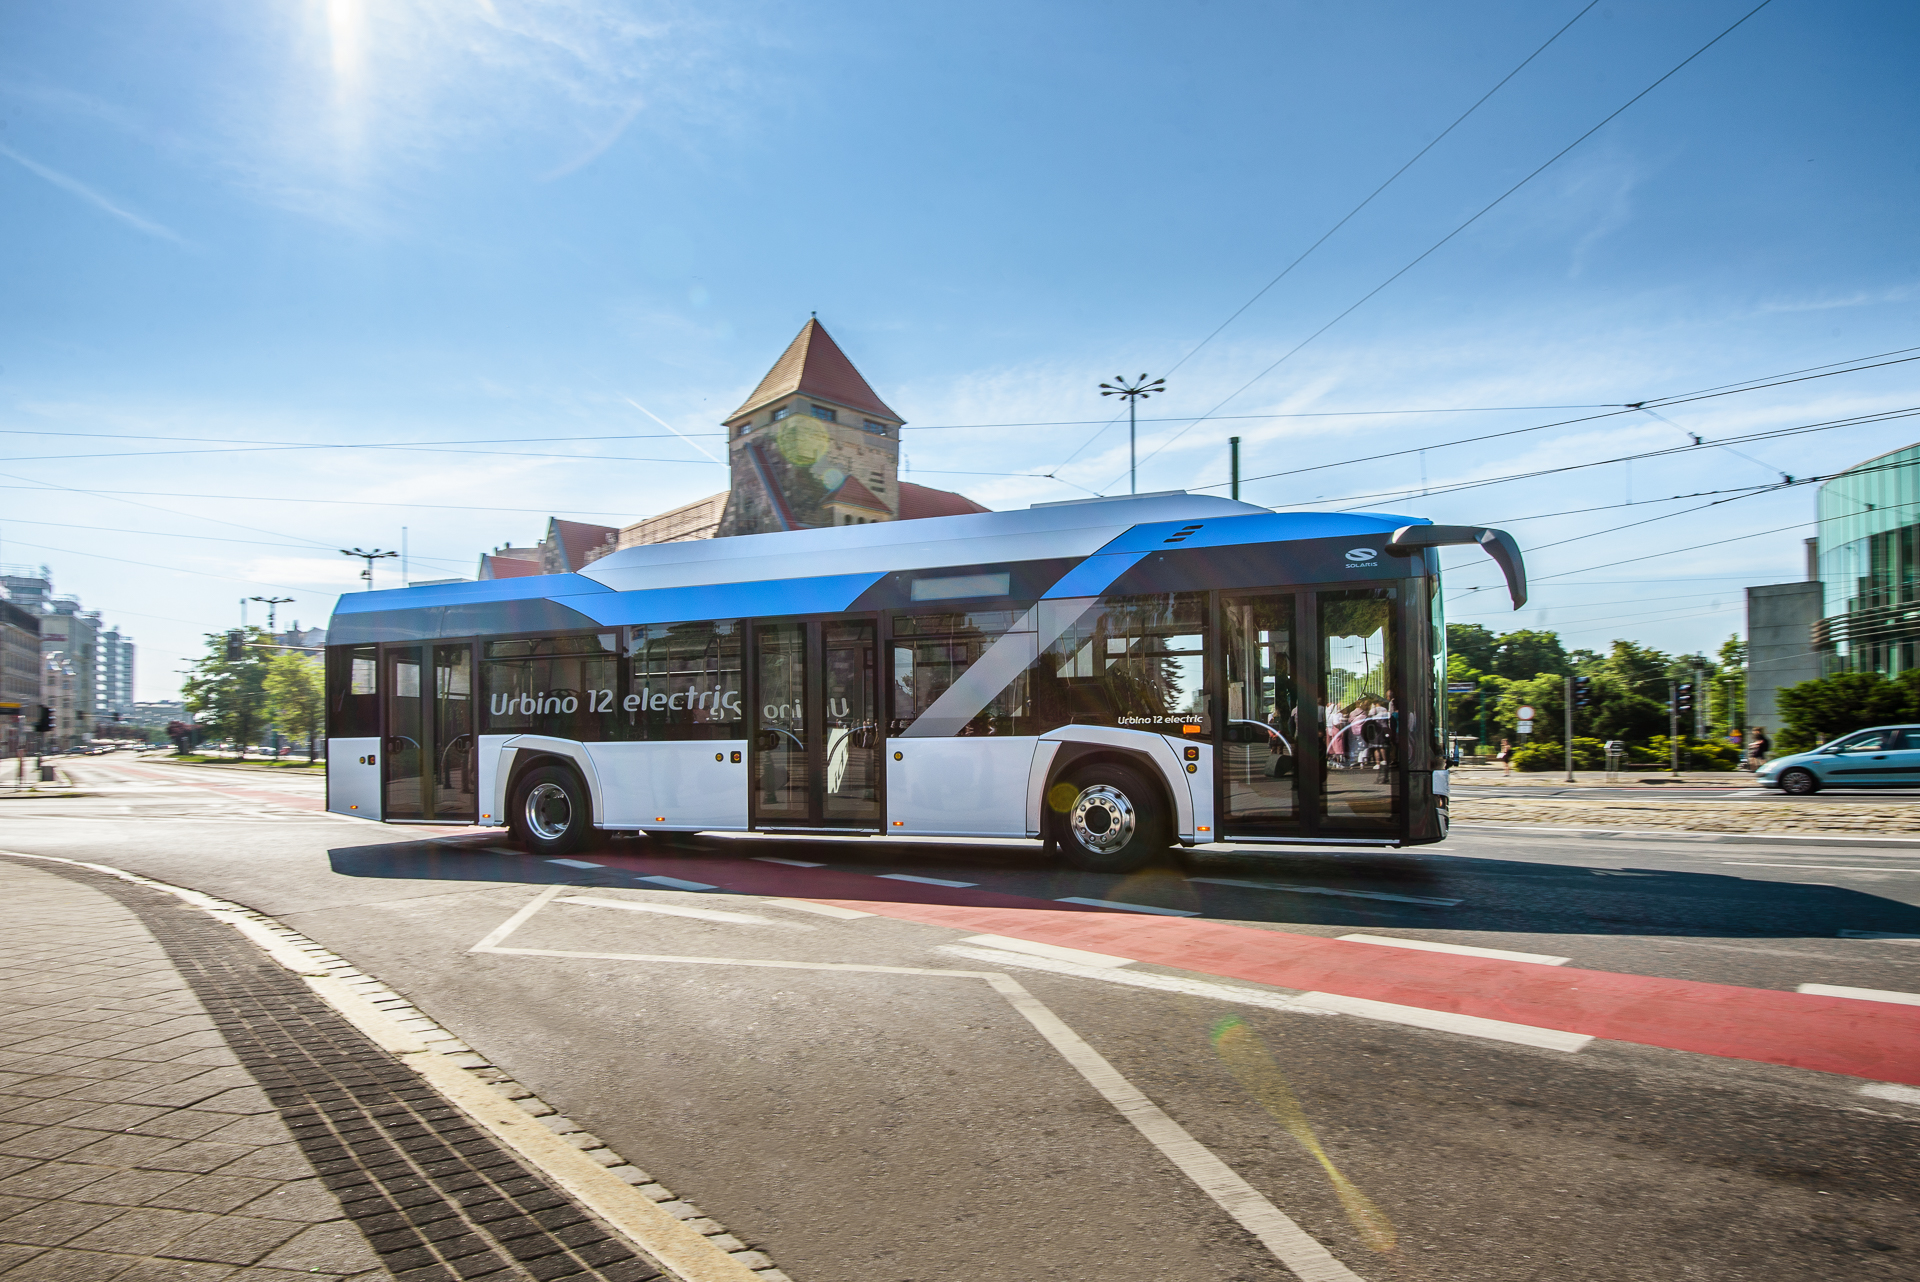 An image of an Urbino 12 bus in Gniezno